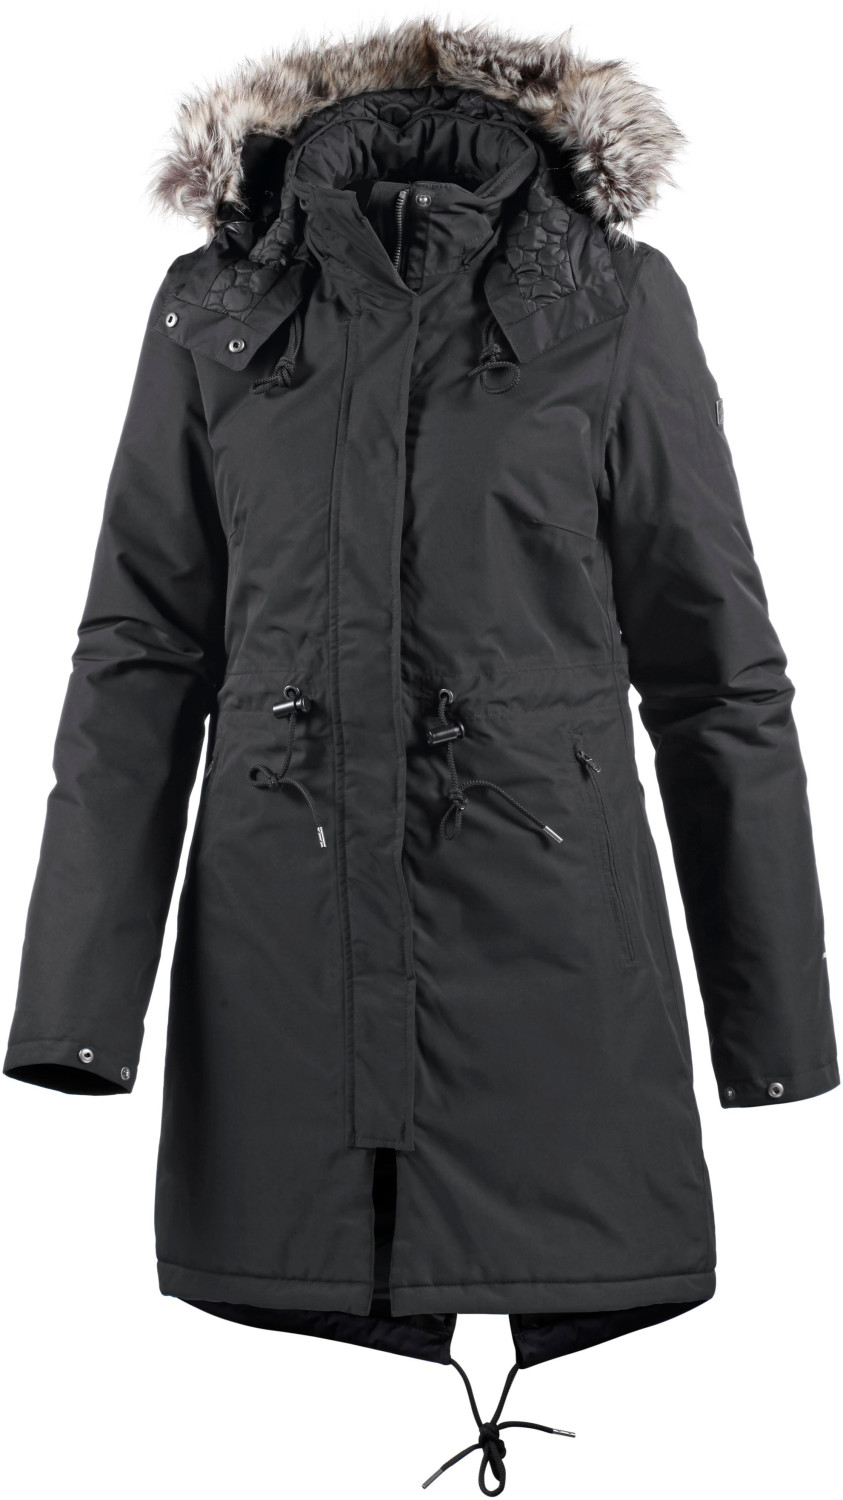 Buy The North Face Zaneck Jacket Women TNF Black from £160.00 (Today ...